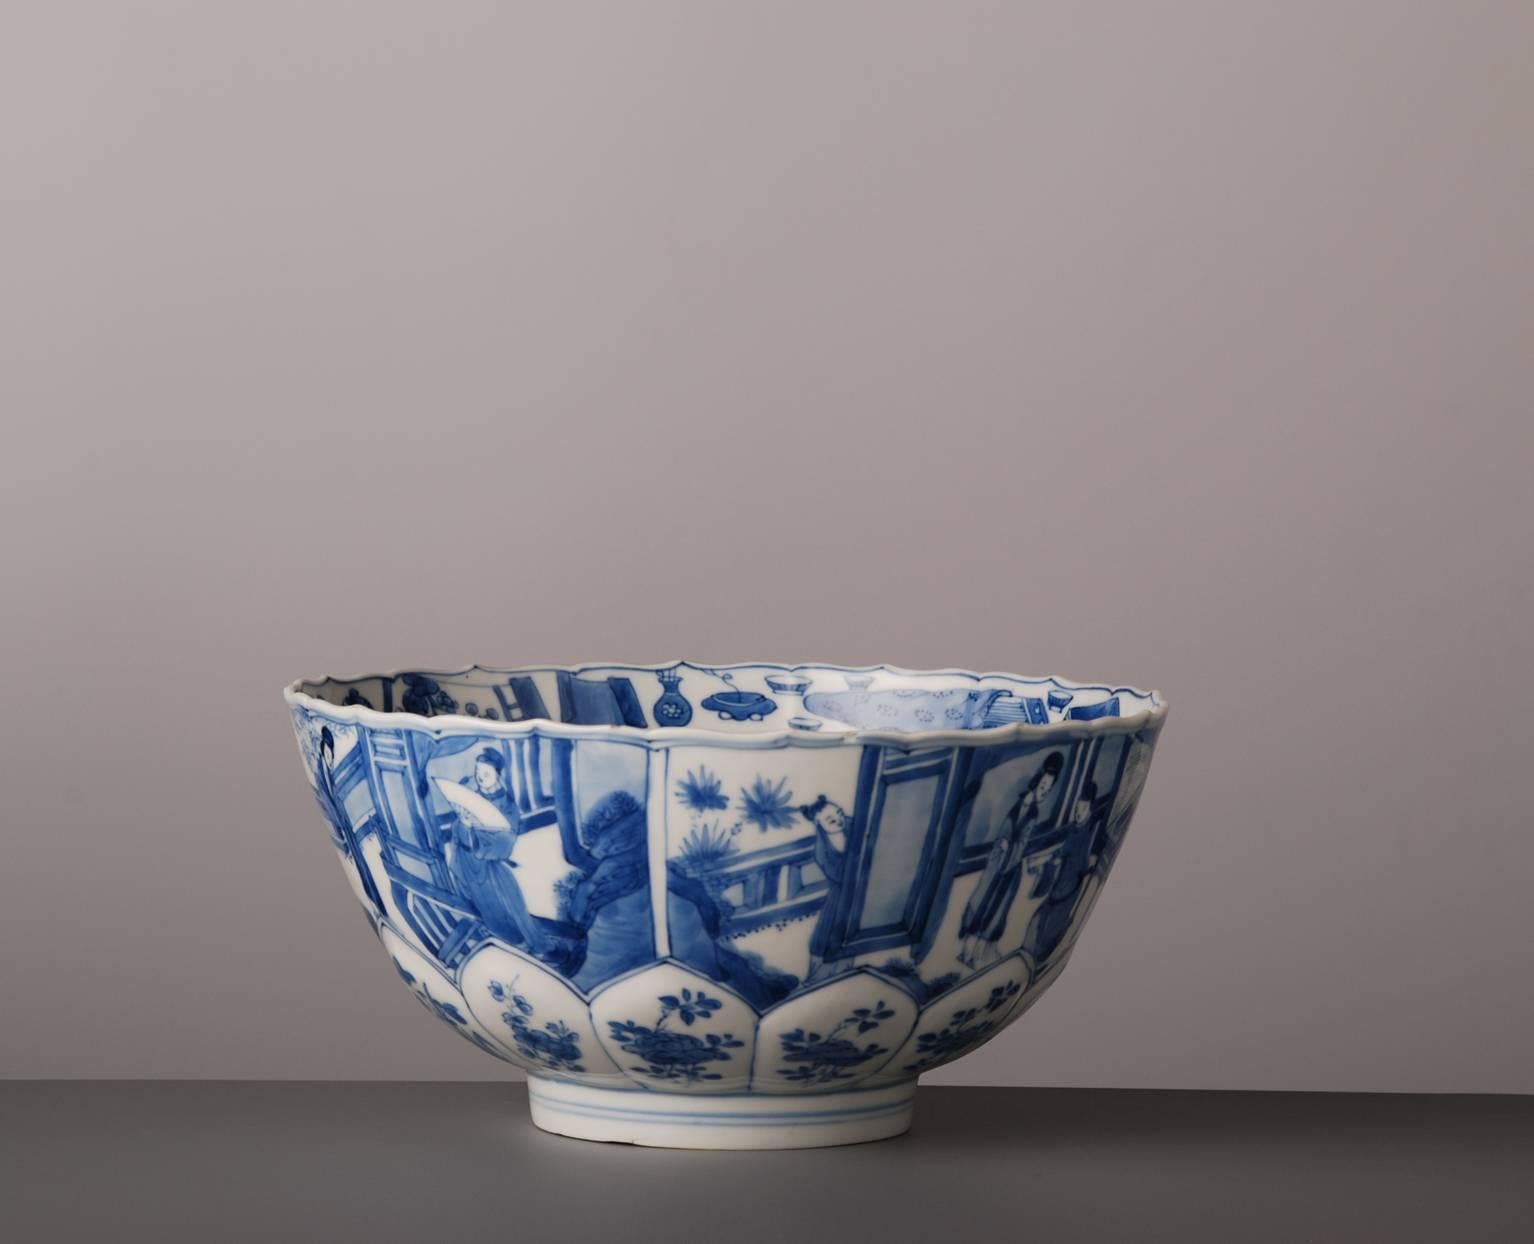 This bowl is potted on a turning wheel to create the round form, afterwards the round clay bowl was pressed in a mould to create the lotus flower form on the lower side of the bowl. Than the ‘naked’ bowl would have been decorated with cobalt